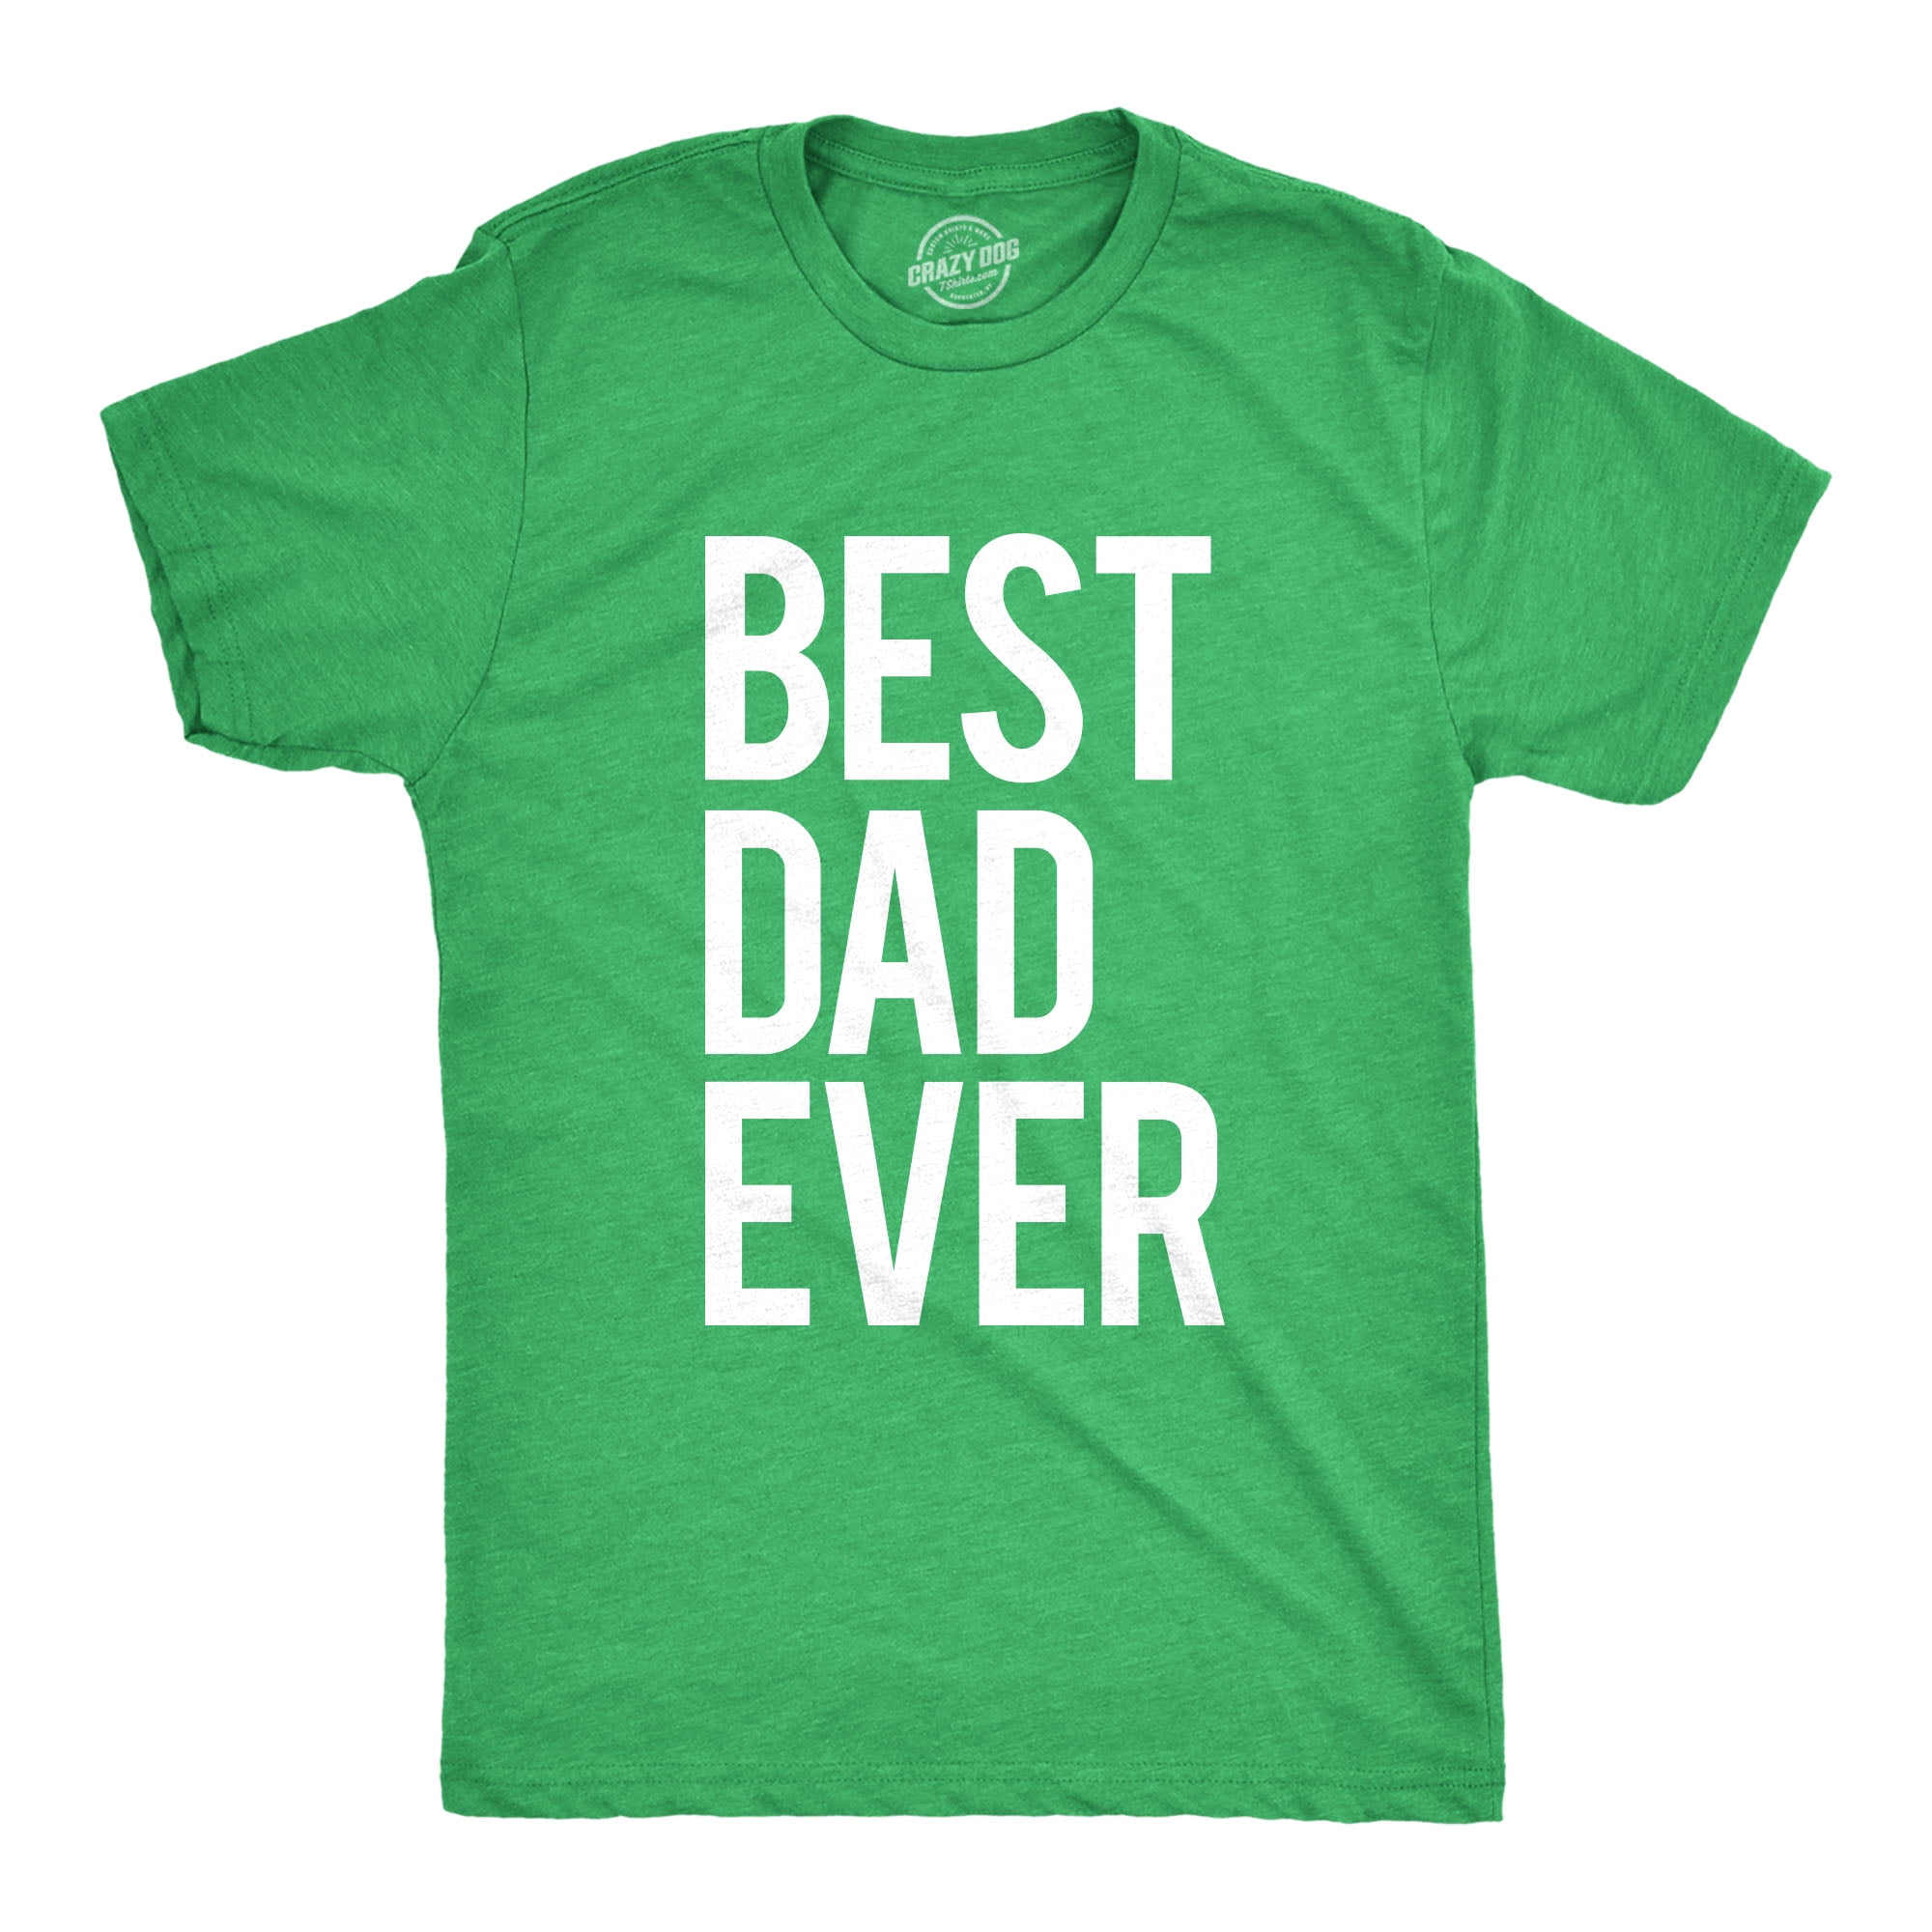 Best Grandpa Ever Idea for Dad Novelty Humor Funny T Shirt